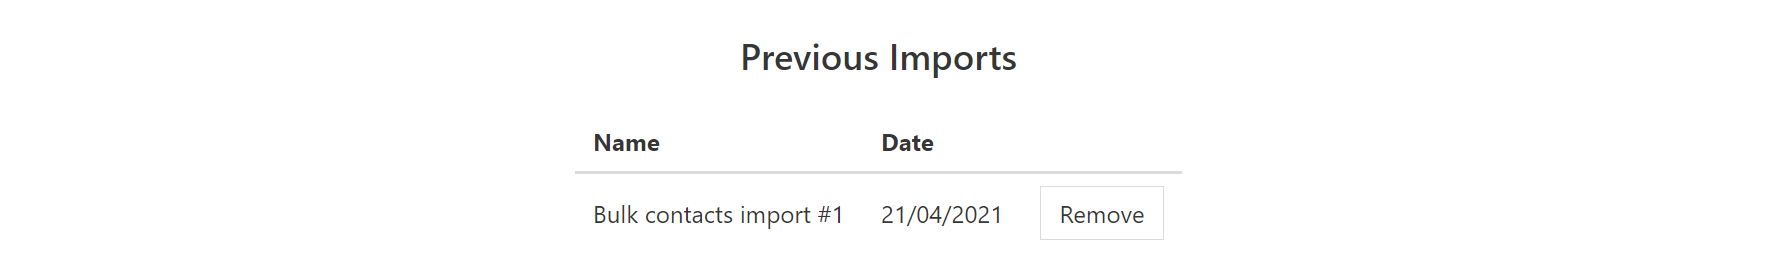 My Tax Digital remove previous imports